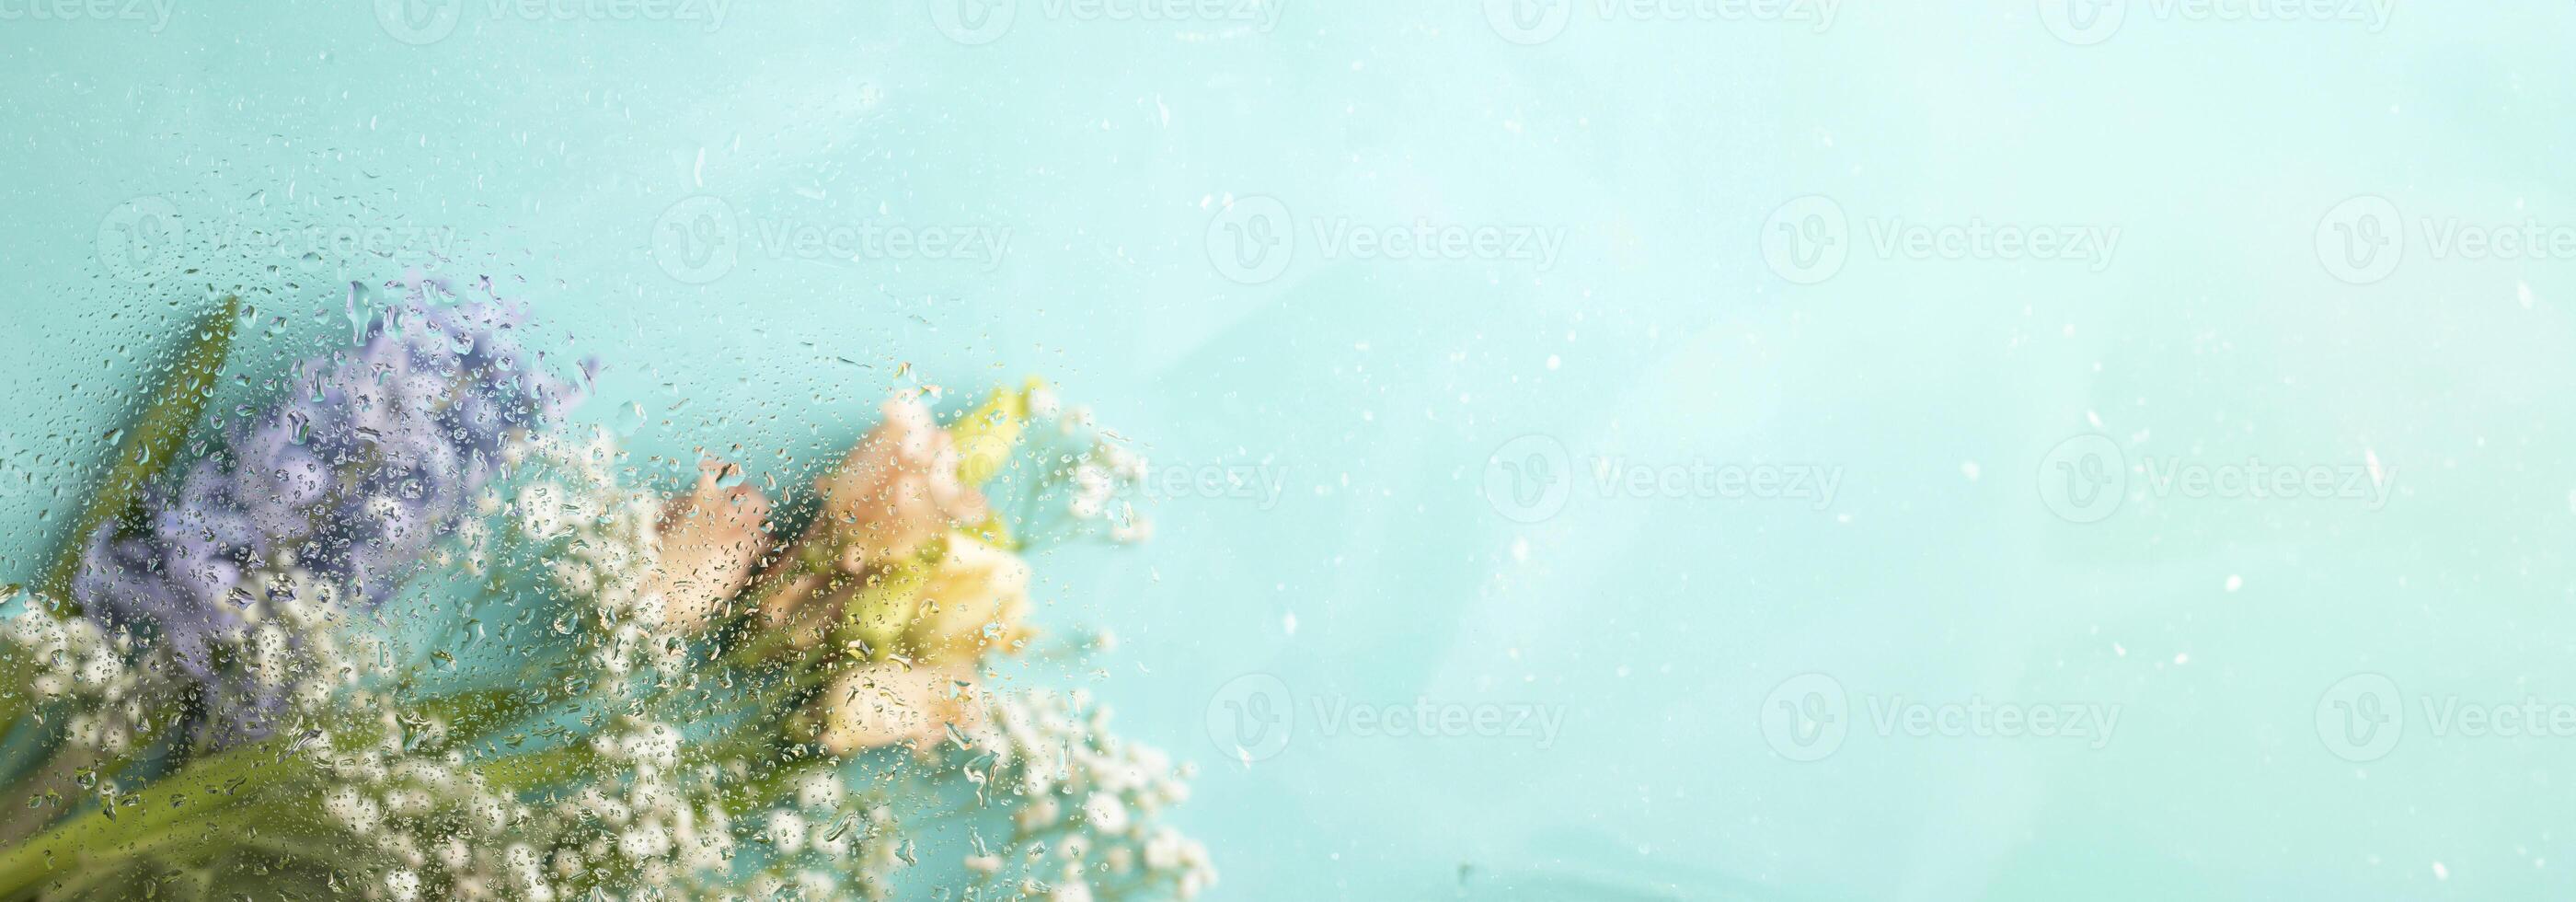 Banner for spring holiday. Blurred flowers on turquoise. Shot through wet glass. Copy space. photo